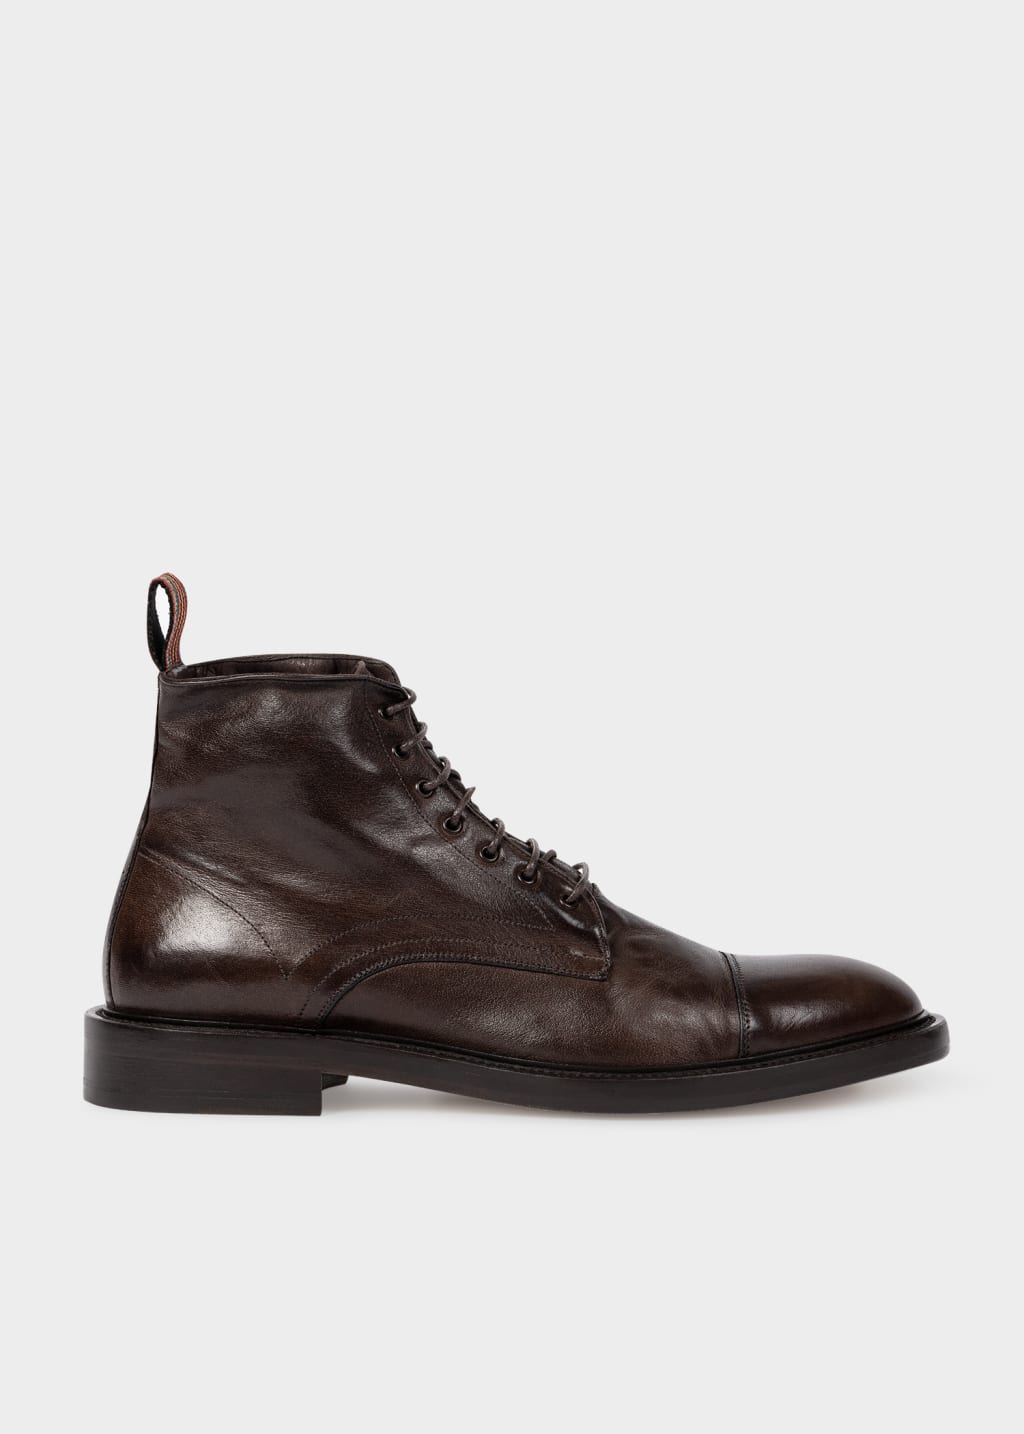 Detail View - Dark Brown Leather 'Newland' Boots Paul Smith